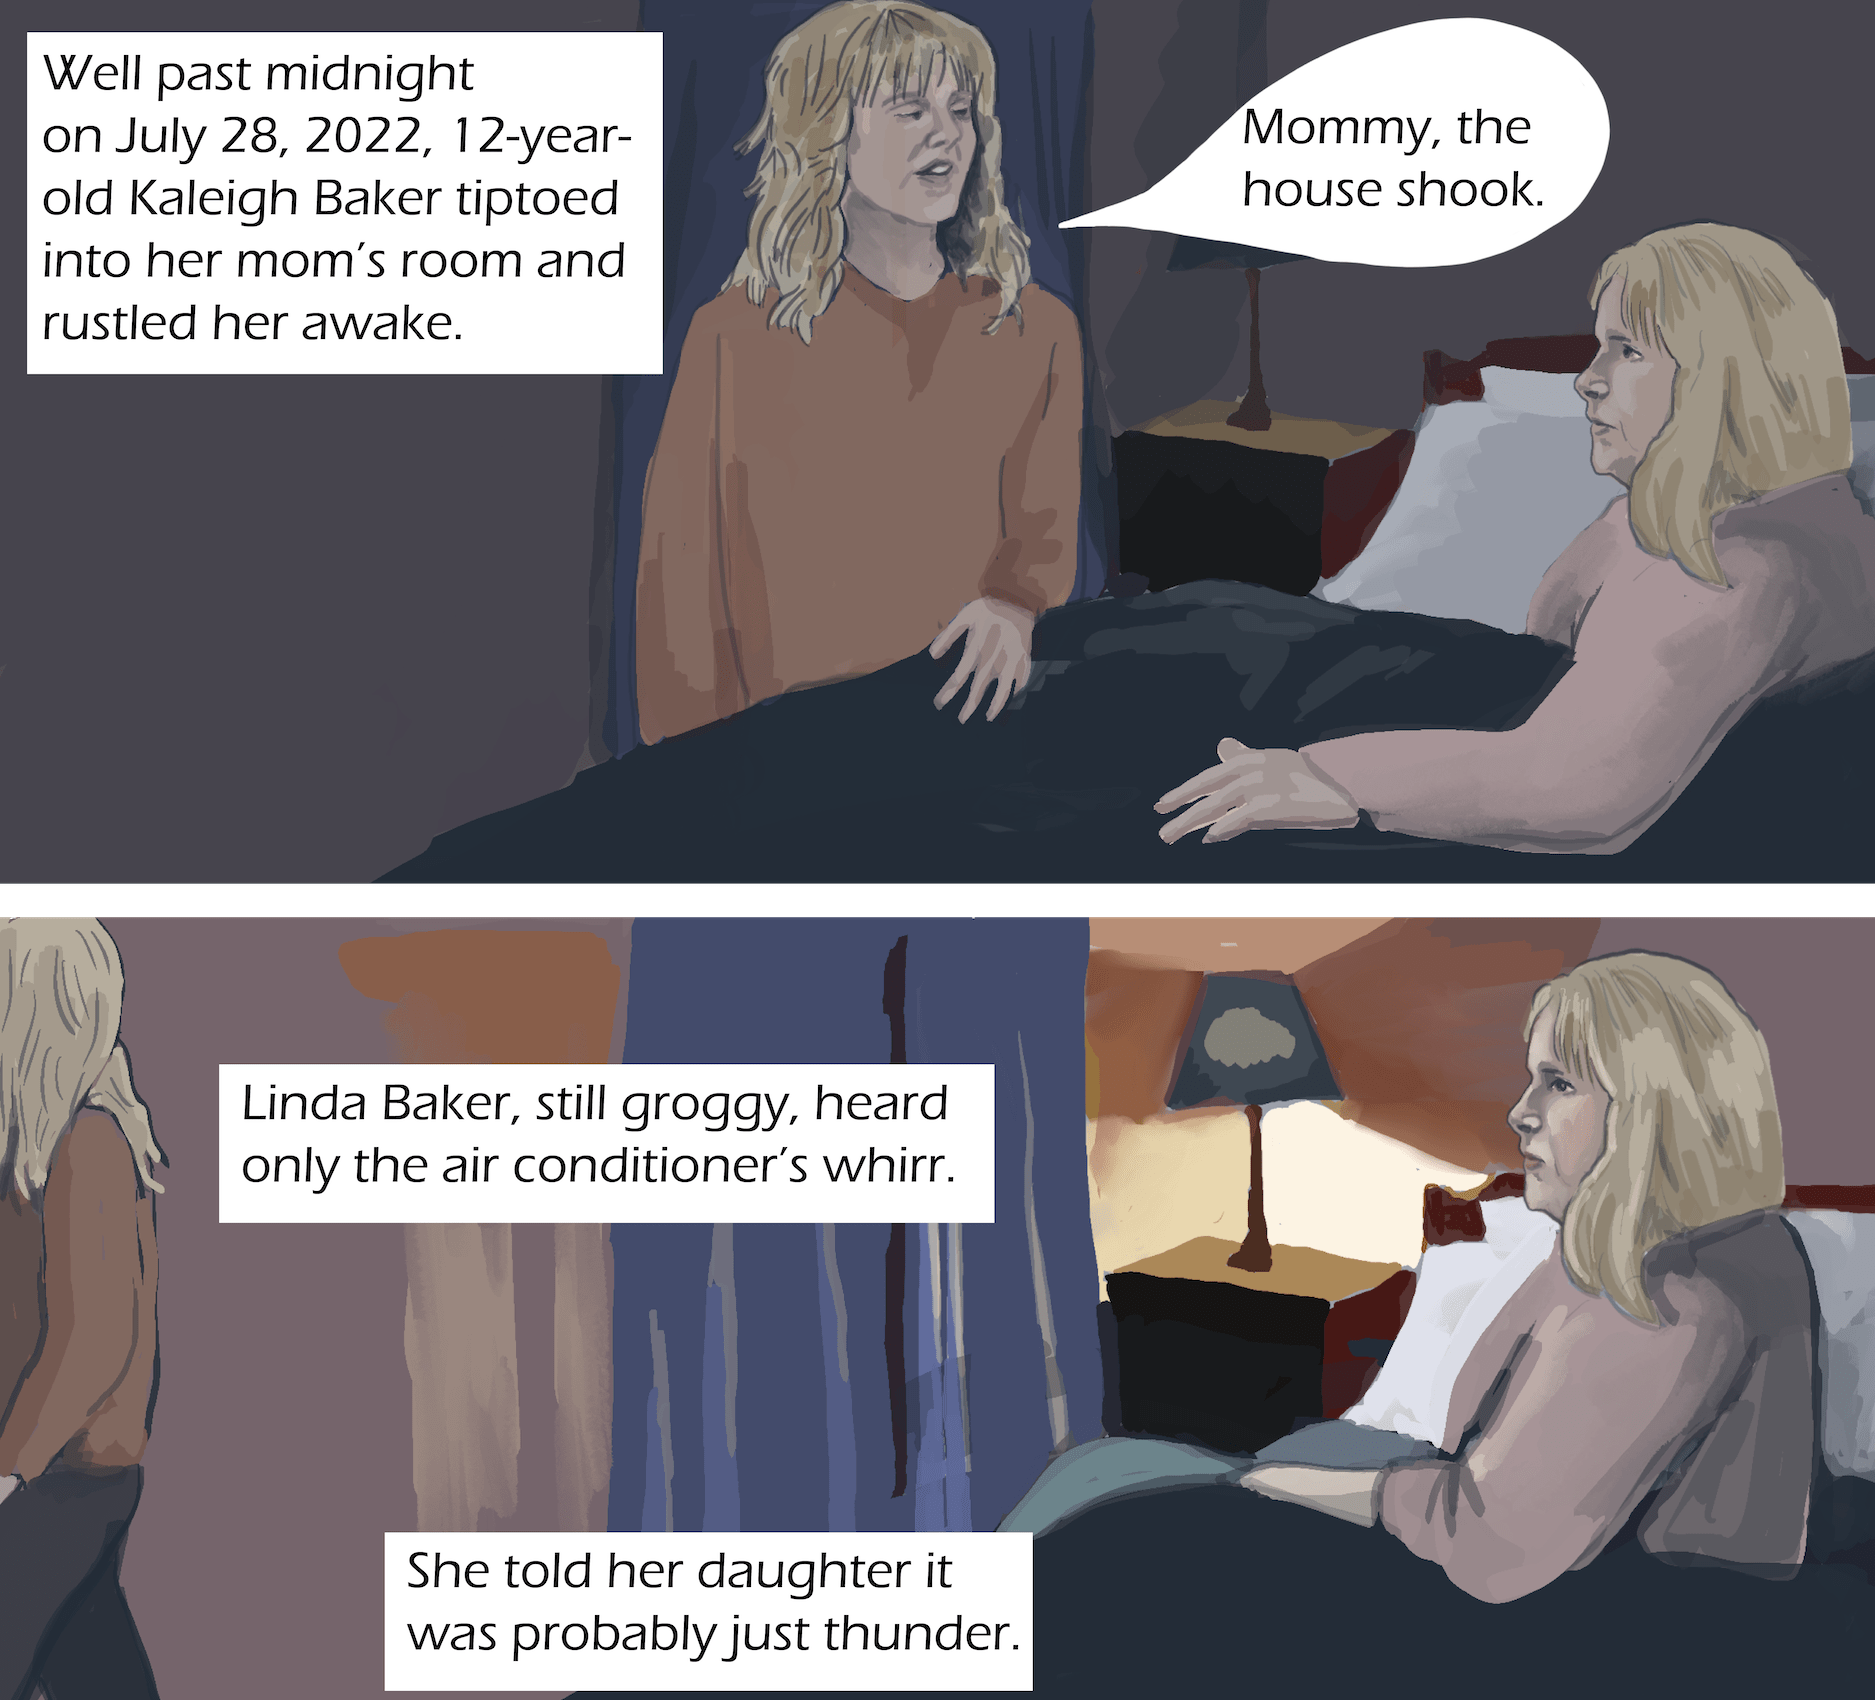 top panel: a blonde adult woman lies in bed. A blonde girl comes up to the side of the bed. Bottom panel: The same adult woman remains in bed, the child walks away from the bed. Text: 1.1. Well past midnight on July 28, 2022, 12-year-old Kaleigh Baker tiptoed into her mom's room and rustled her awake. 1.2 “Mommy, the house shook,” Kaleigh said. Linda Baker, still groggy, heard only the air conditioner’s whirr. She told Kaleigh it was probably just thunder. Kaleigh crept back upstairs